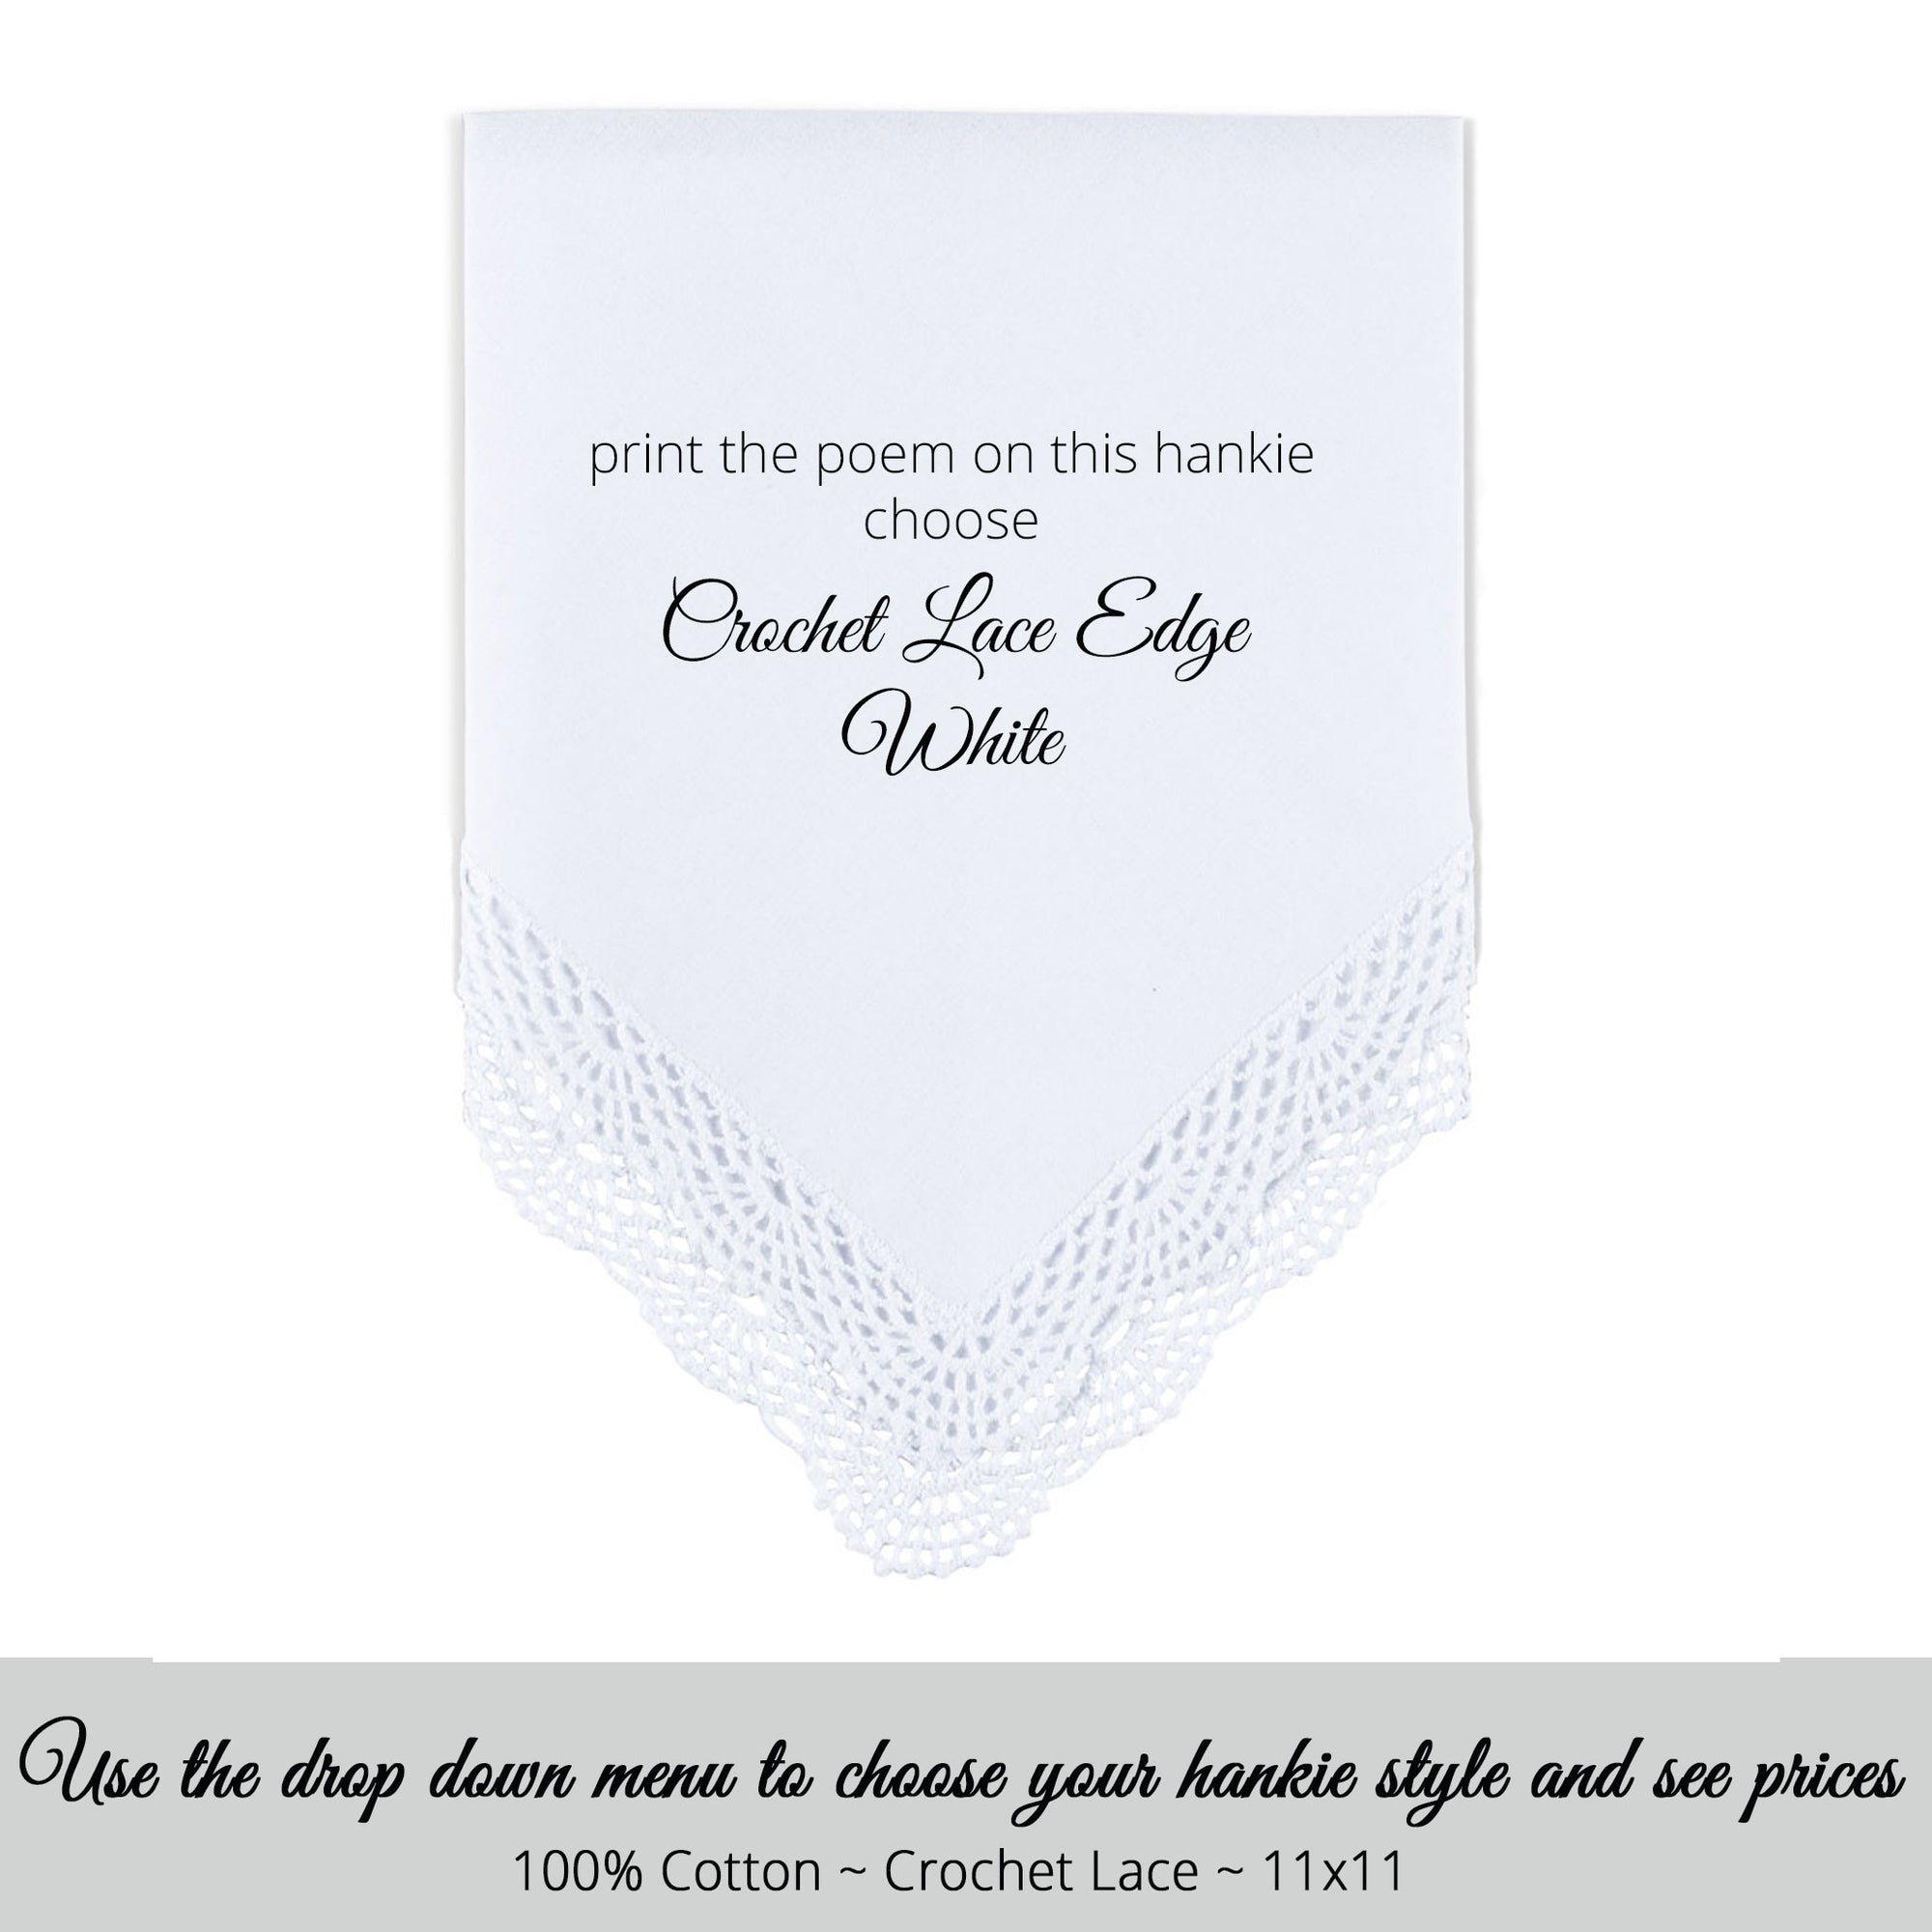 Wedding handkerchief white with crochet lace edge poem printed hankie for the sister of the bride maid of honor